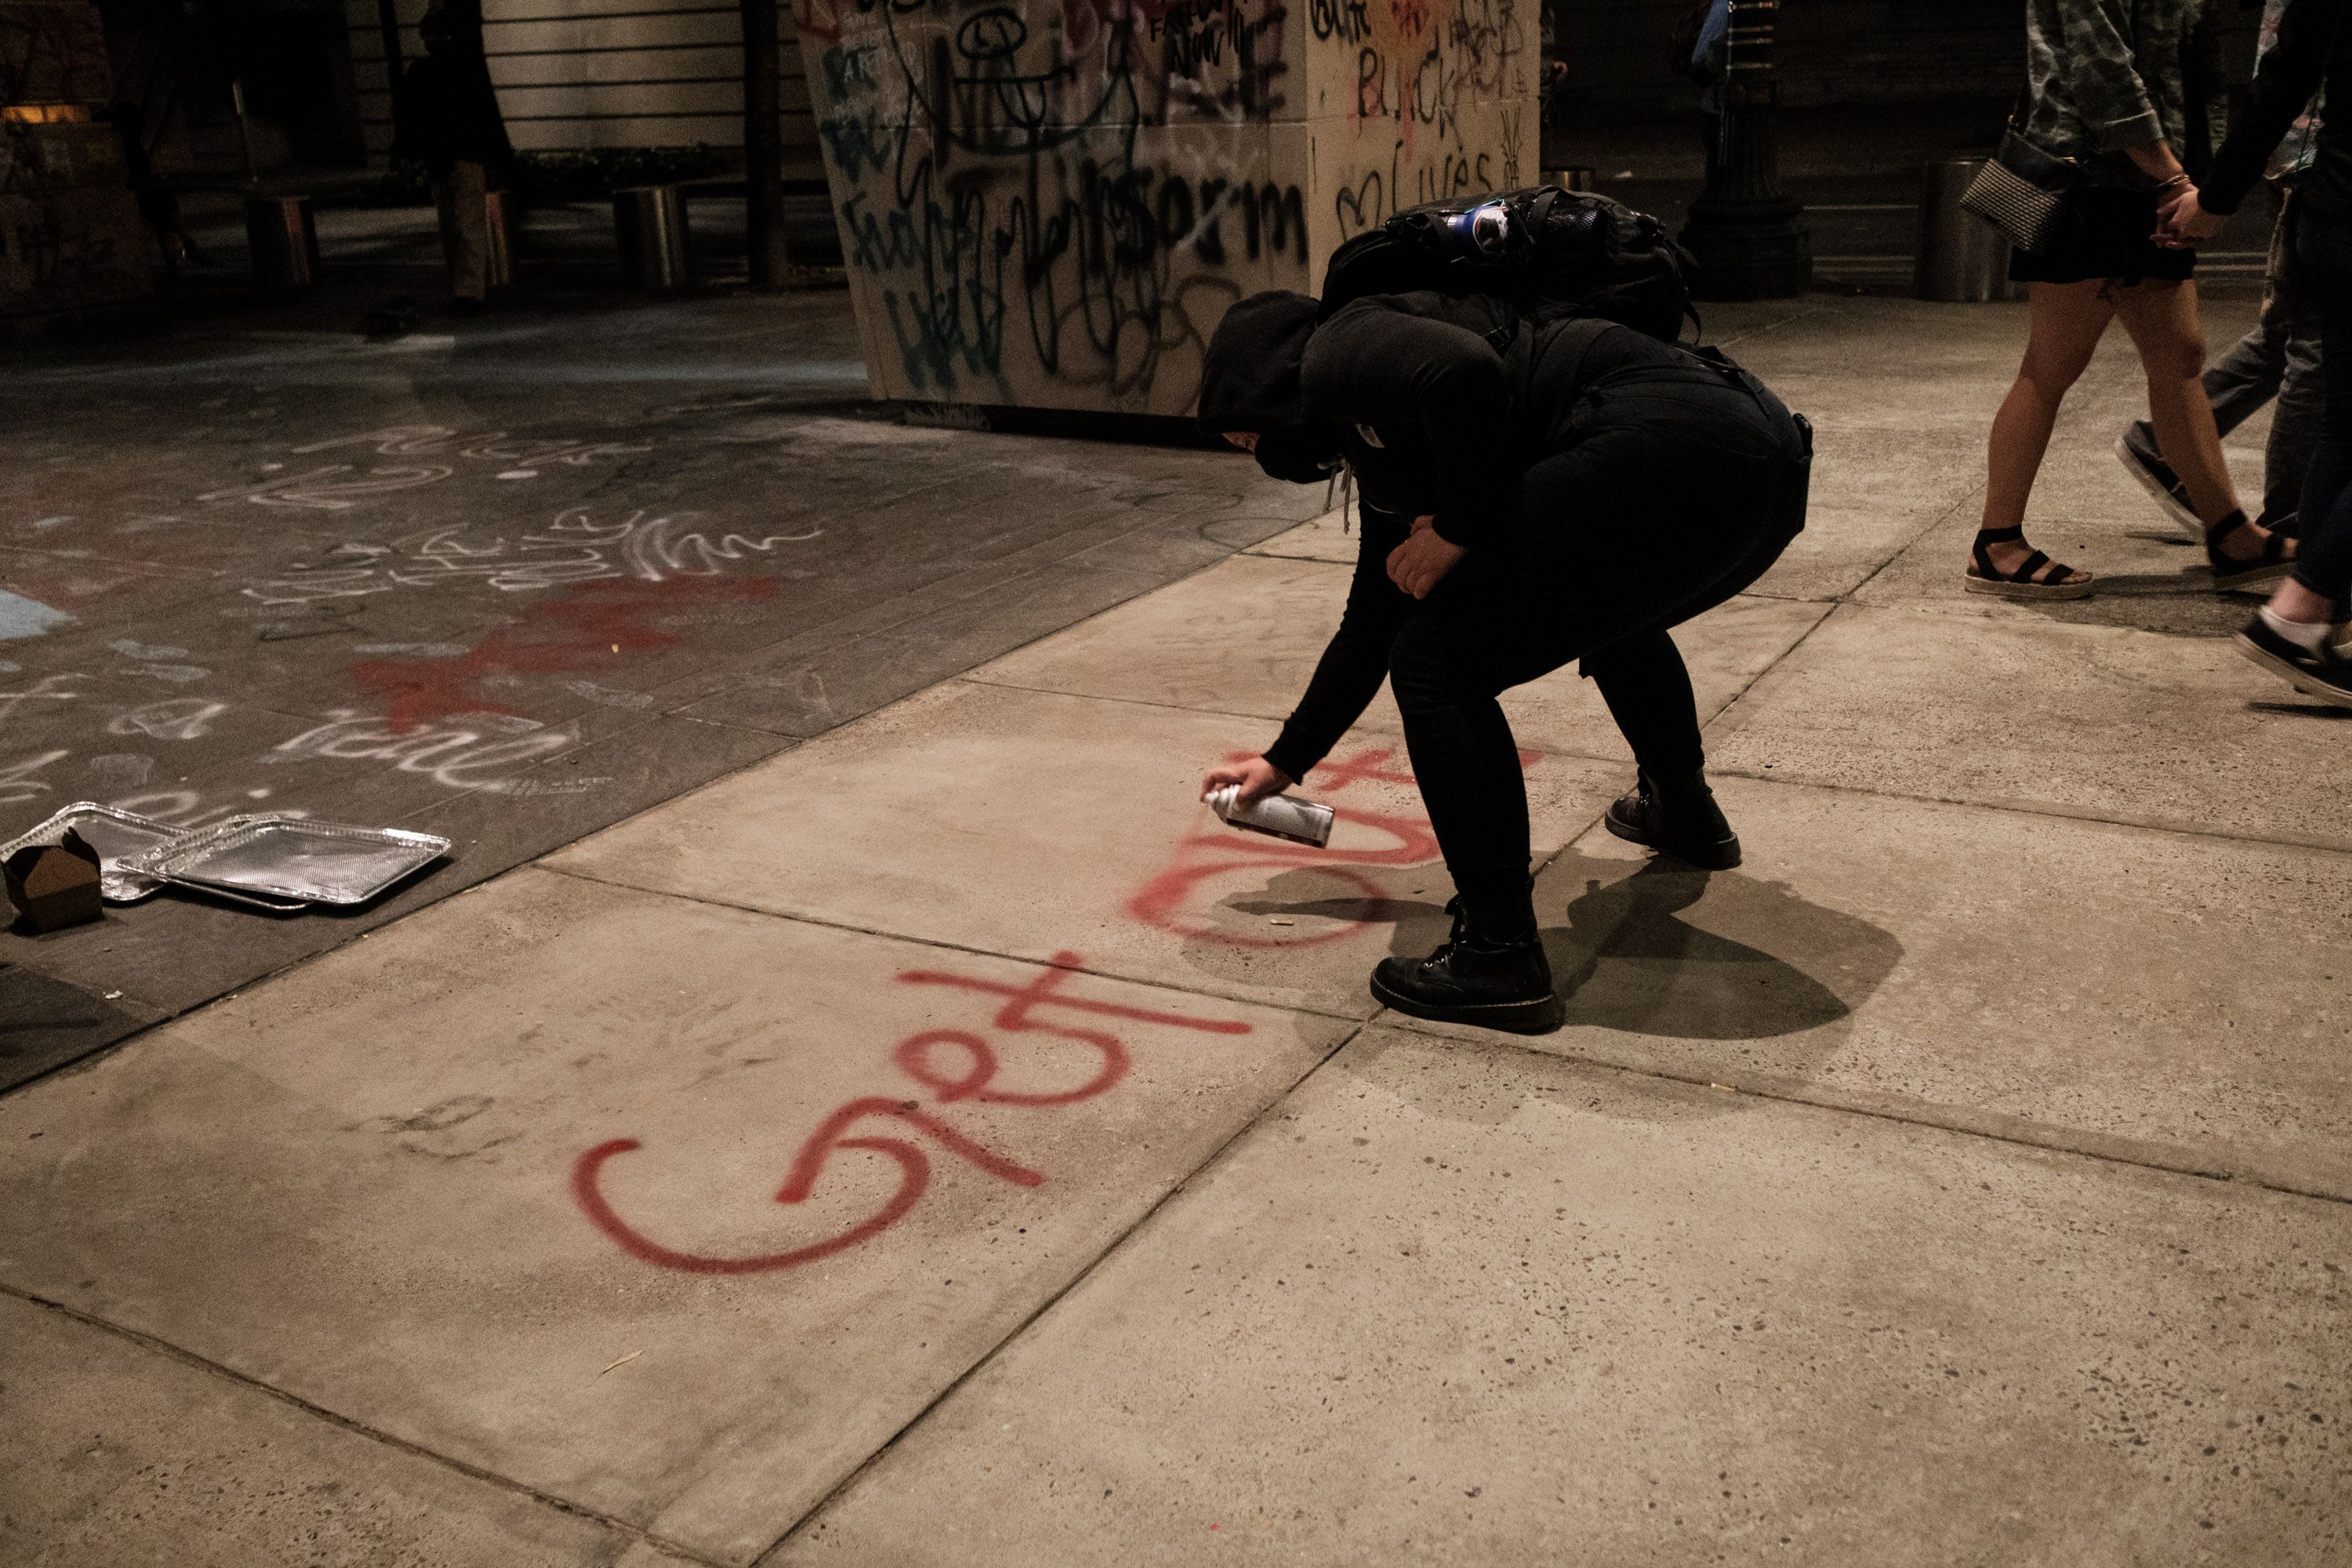 A protestor painting "get out" on the sidewalk. Photo: Mason Trinca/Getty Images